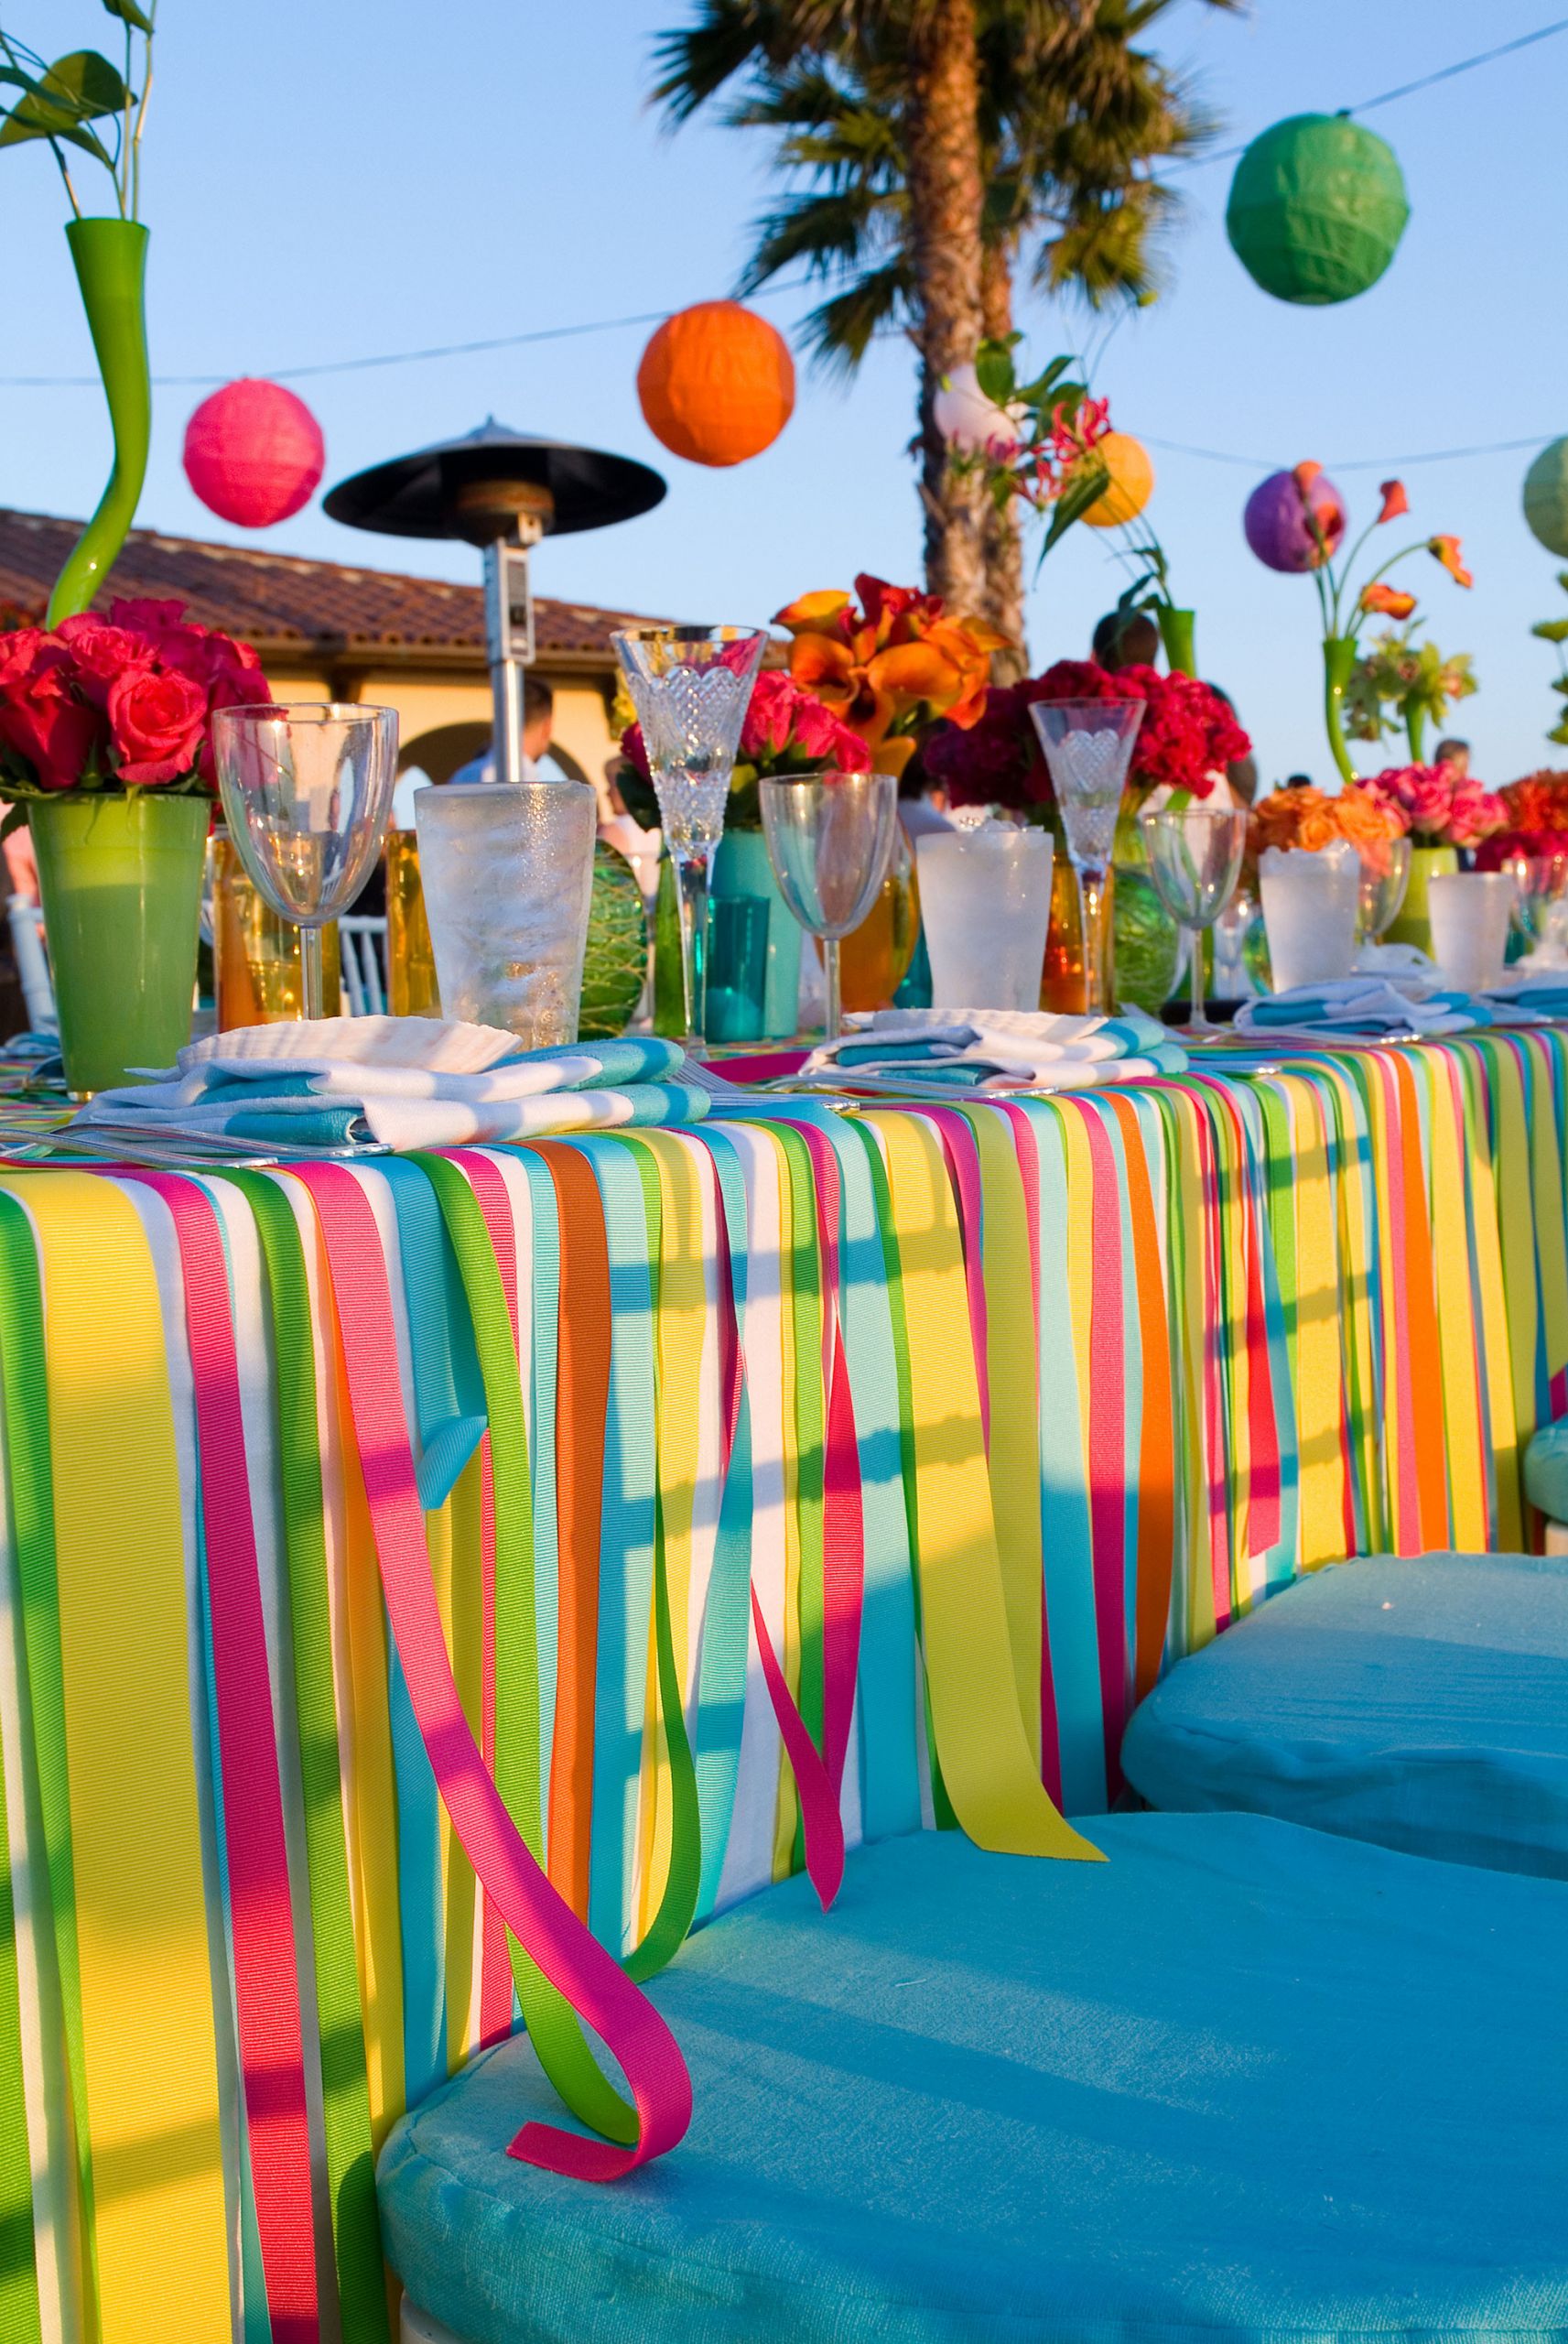 Backyard Party Ideas Decorating
 Backyard Party Ideas How To Throw An Outdoor Party